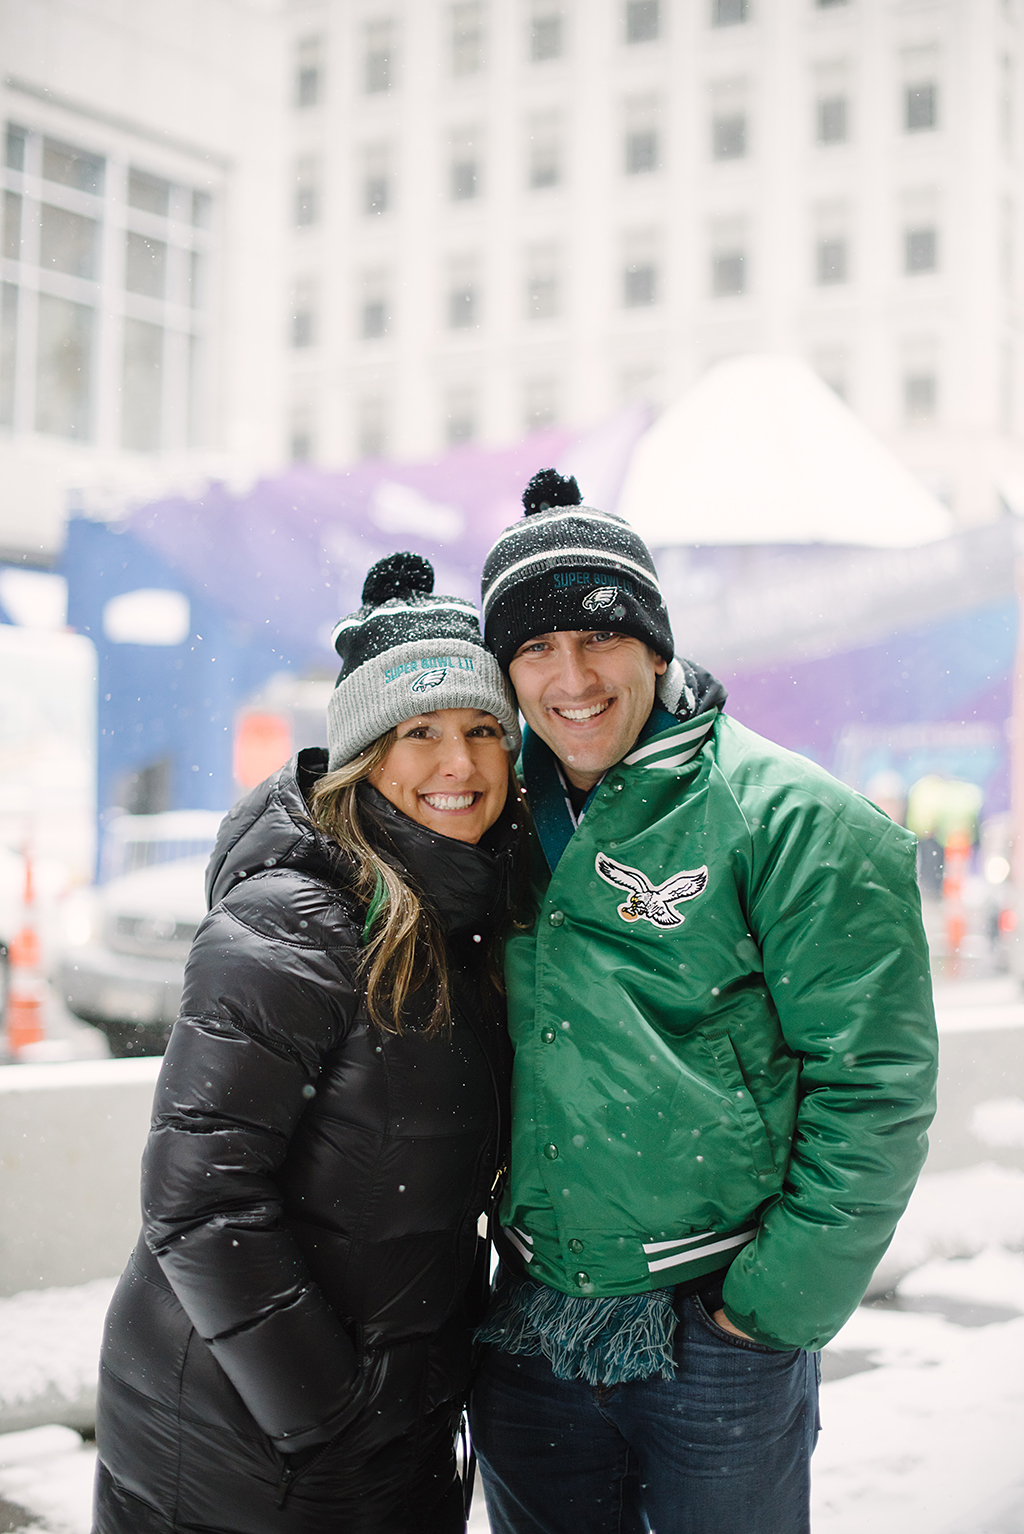 Eagles fan couple pose in the superbowl